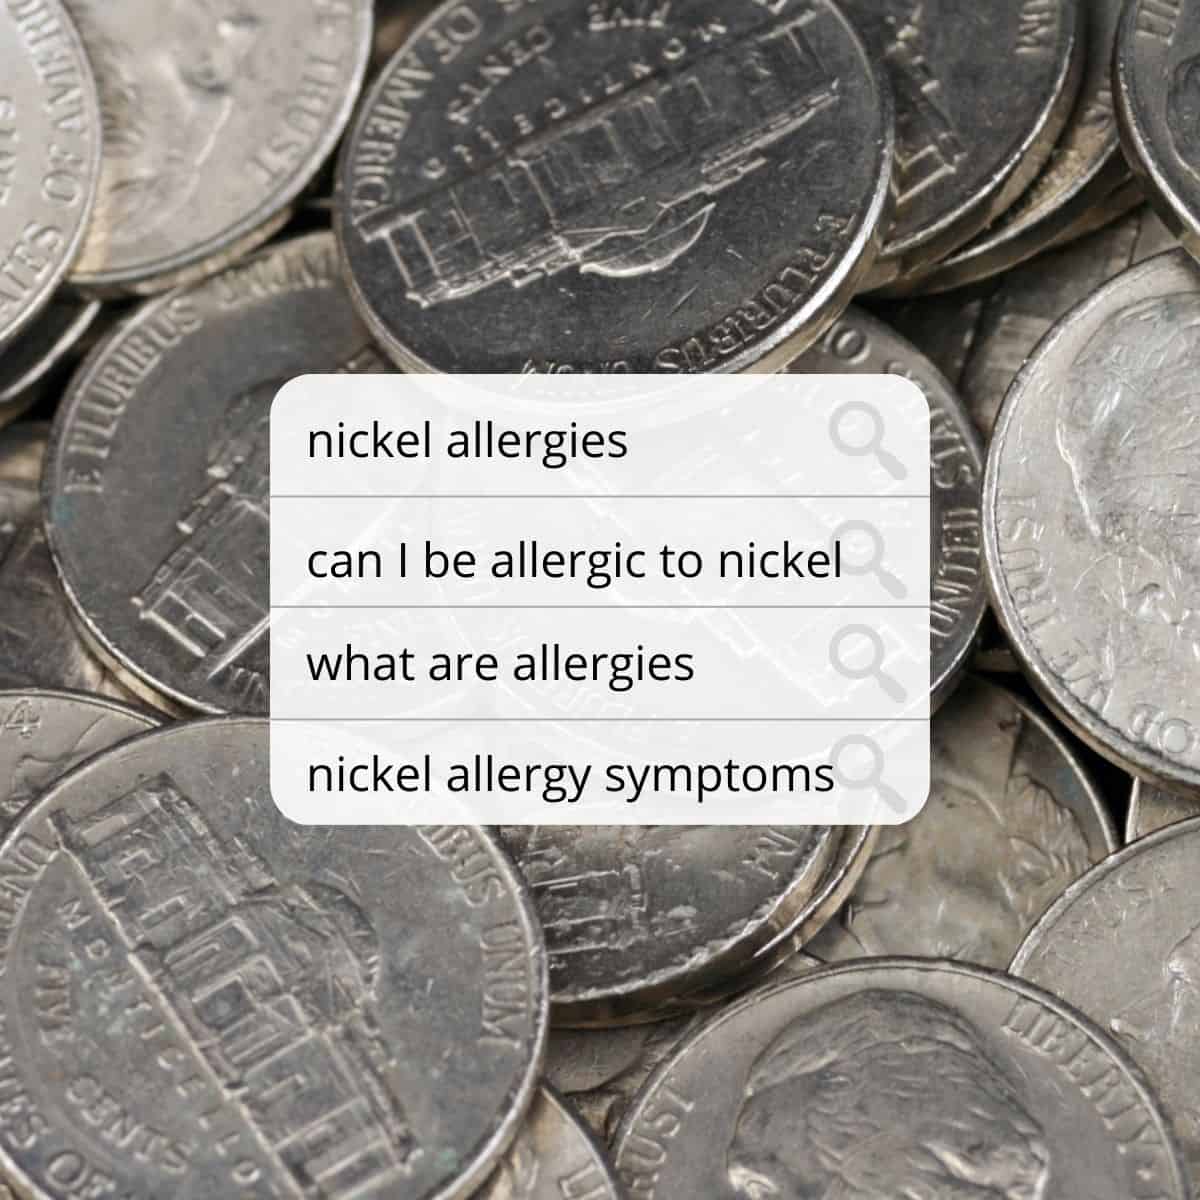 Up close image of nickel coins with a text box shaped like a search box with questions about nickel allergies.